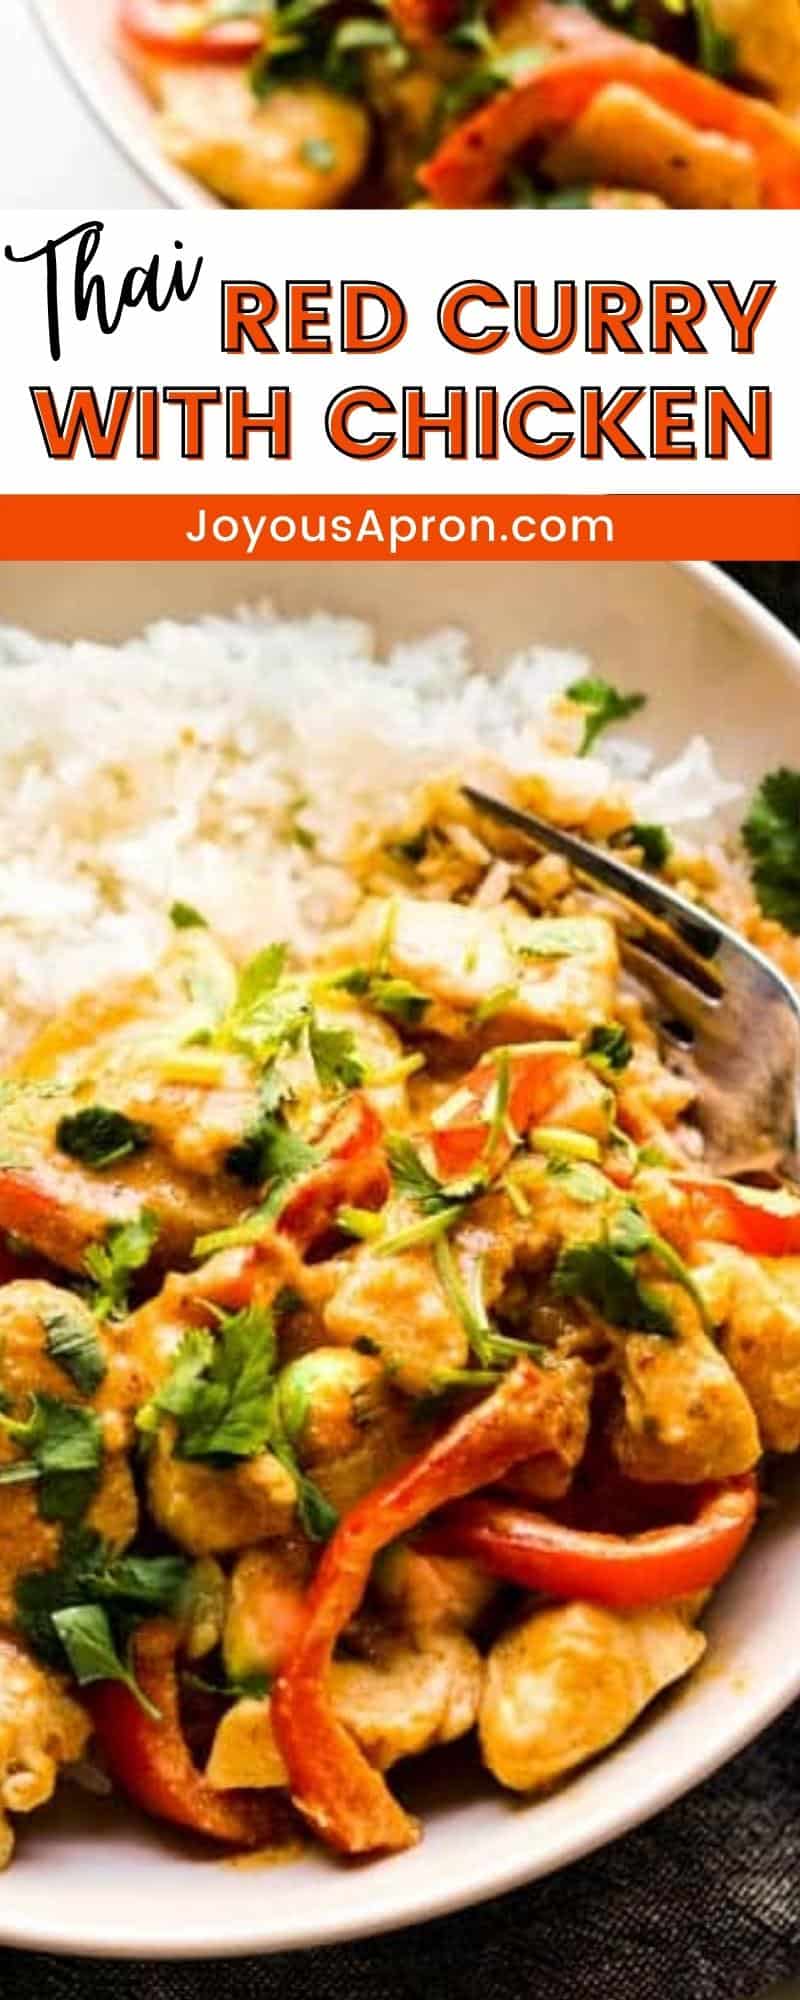 Thai Red Coconut Curry - authentic creamy Thai curry loaded with chicken, bell peppers, bamboo shoots, and zucchini, and garnished with cilantro. Easy Asian dinner that takes only 30 minutes to make and is incredibly flavorful and tasty! via @joyousapron